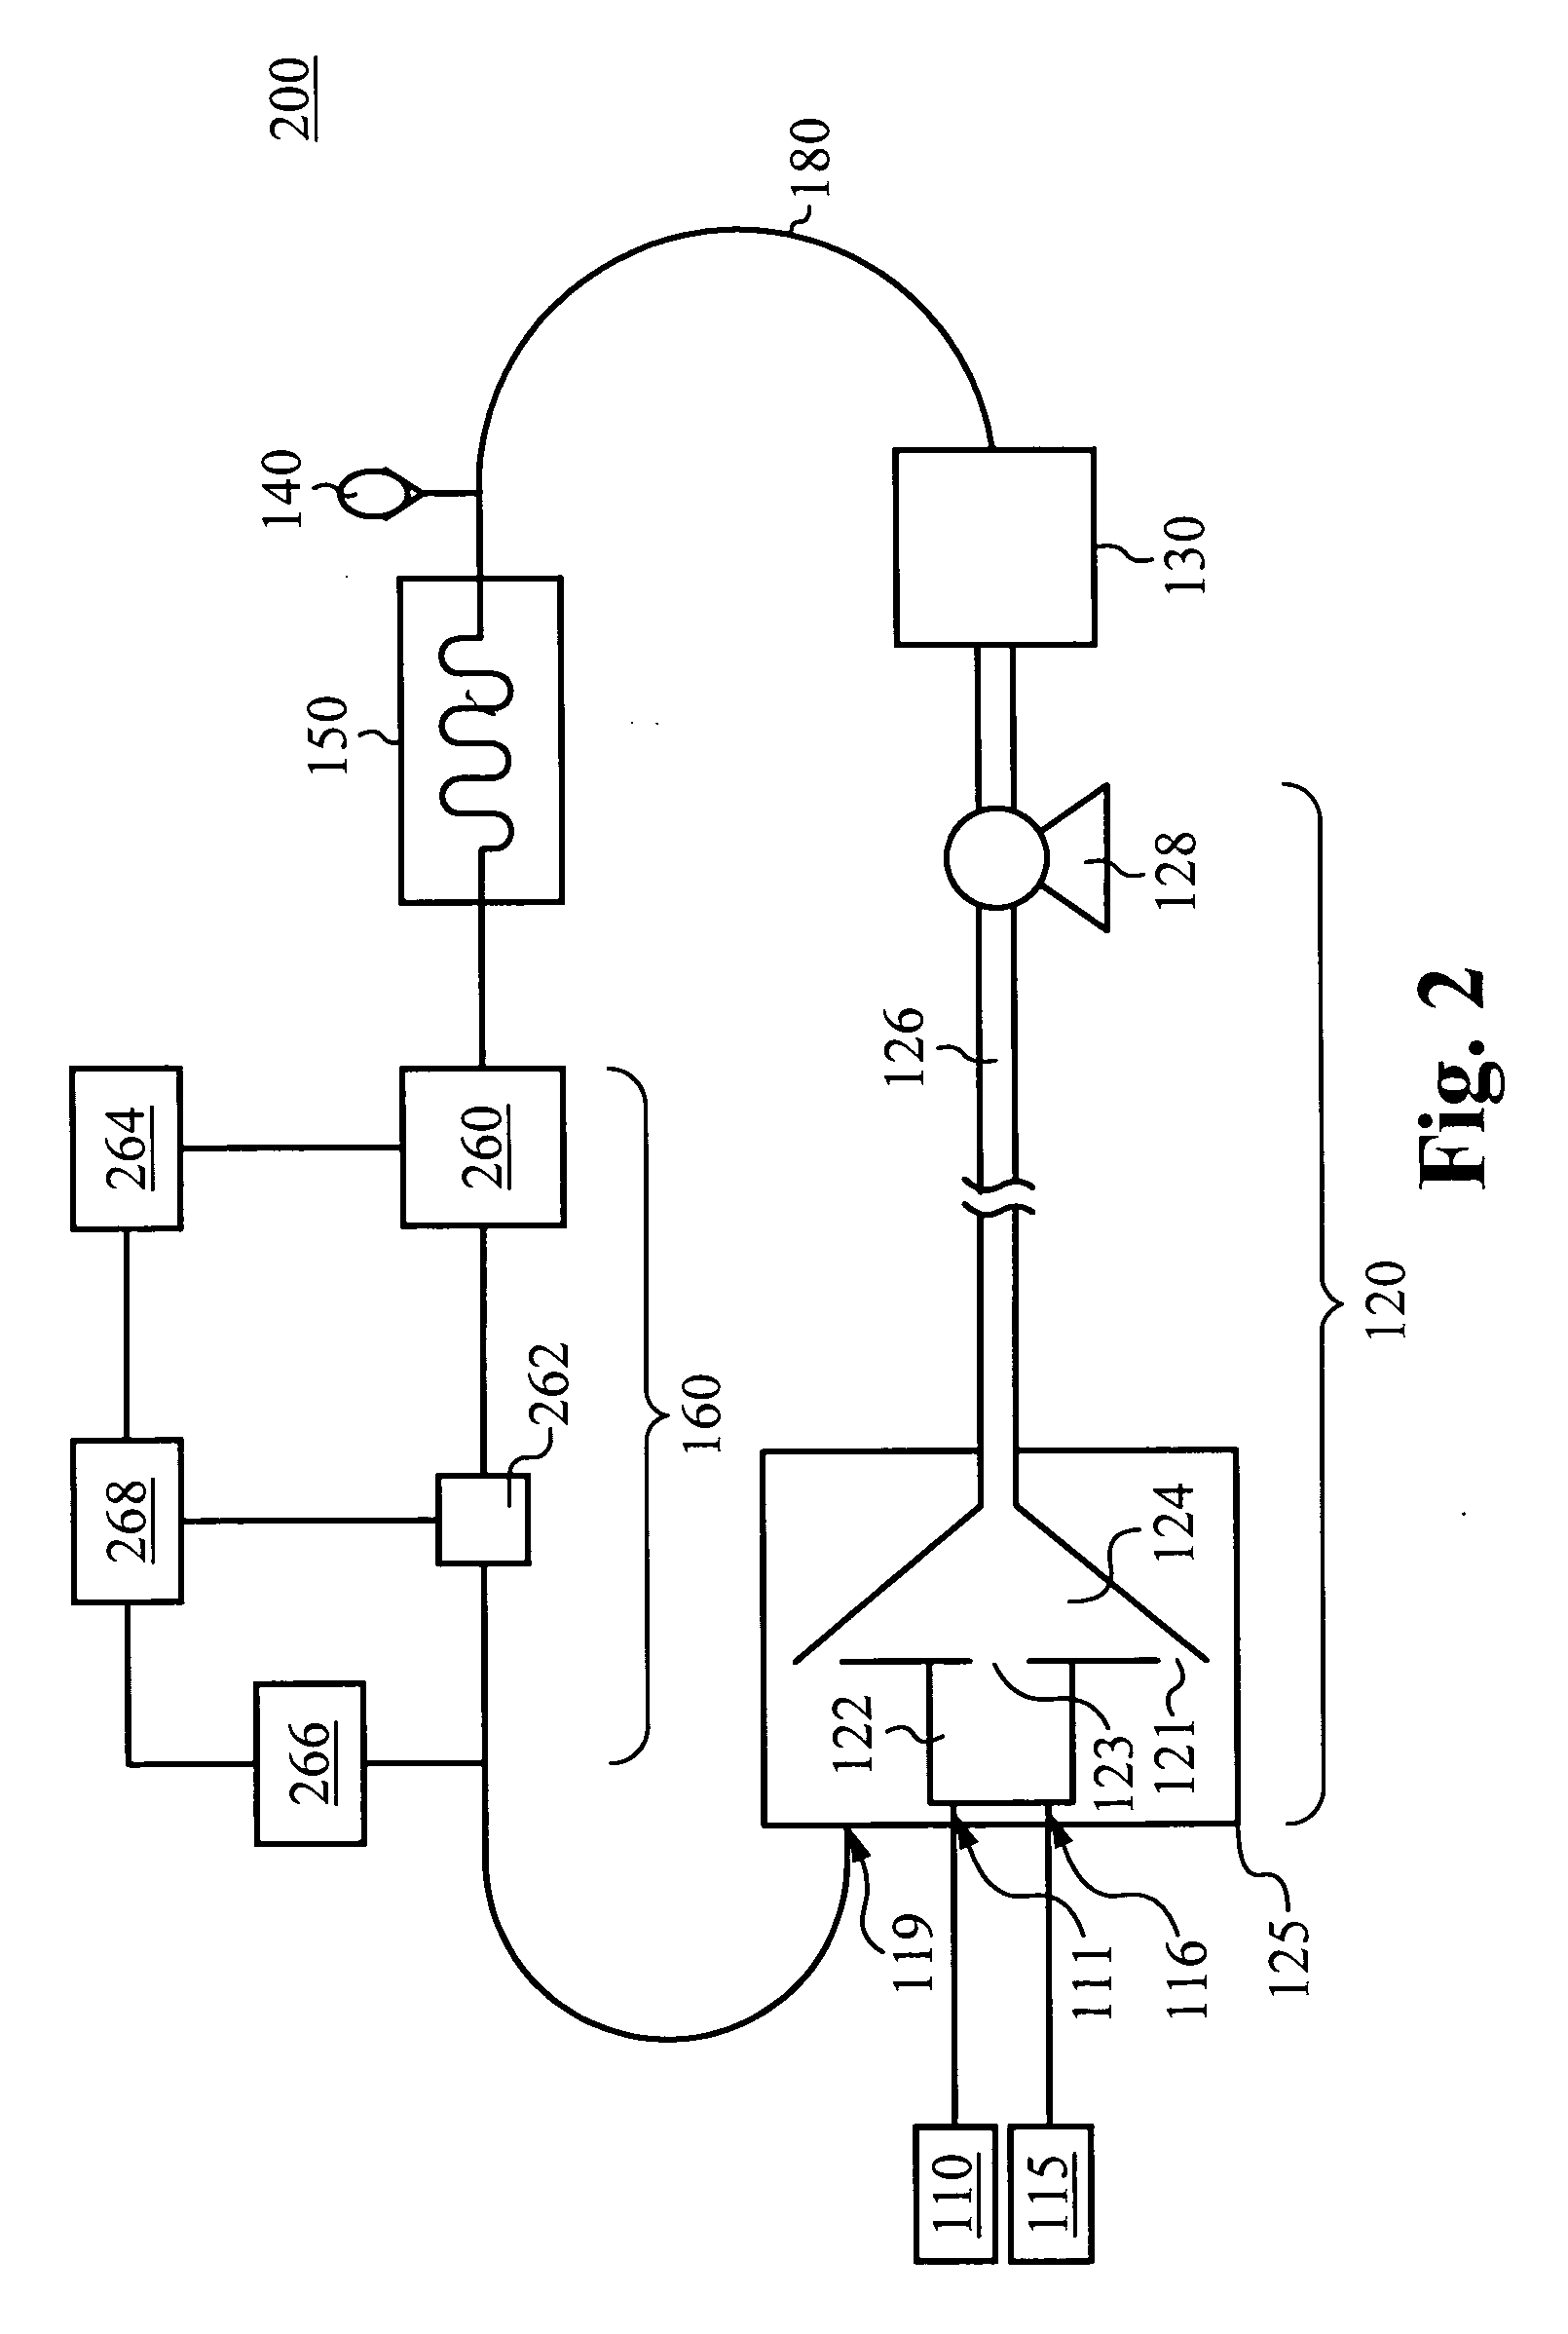 Fluid recirculation system for use in vapor phase particle production system